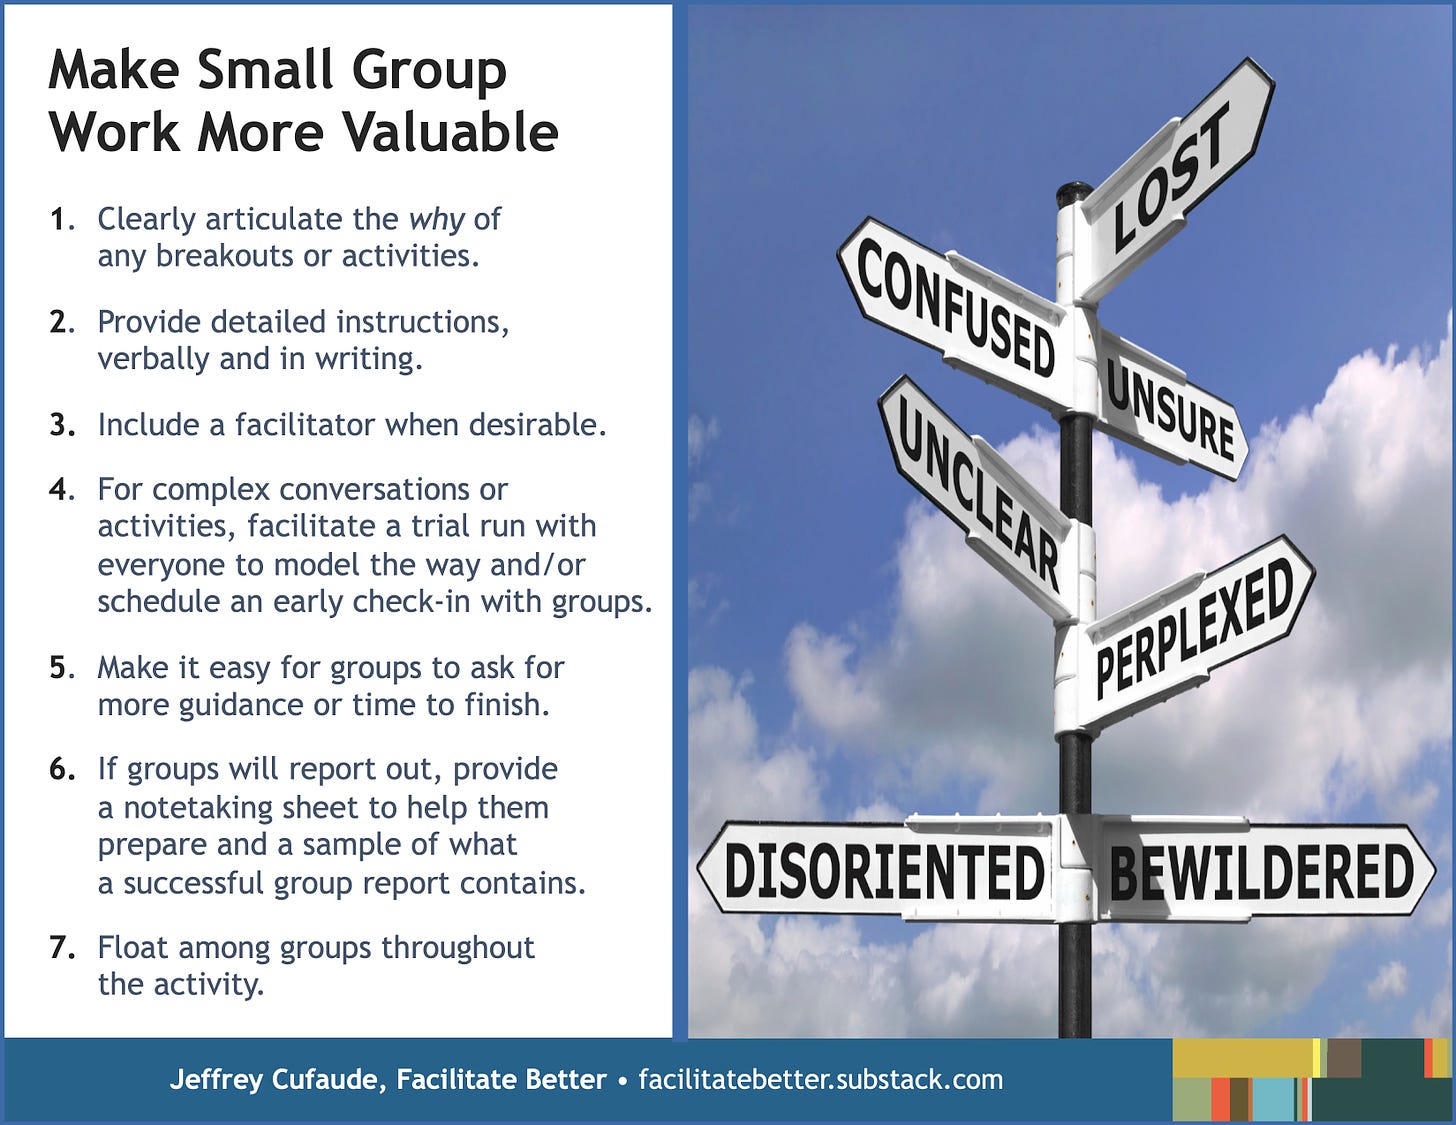 The right half of the image is a tall vertical directional signpost.  Clouds are in the background and on the signpost are white arrows aimed in different directions.  Each has a word on it including: lost, confused, unsure, unclear, perplexed, disoriented, and bewildered.  On the left is the headline “Make Small Group Work More Valuable.”  Below this headline are the seven tips included in the actual essay.